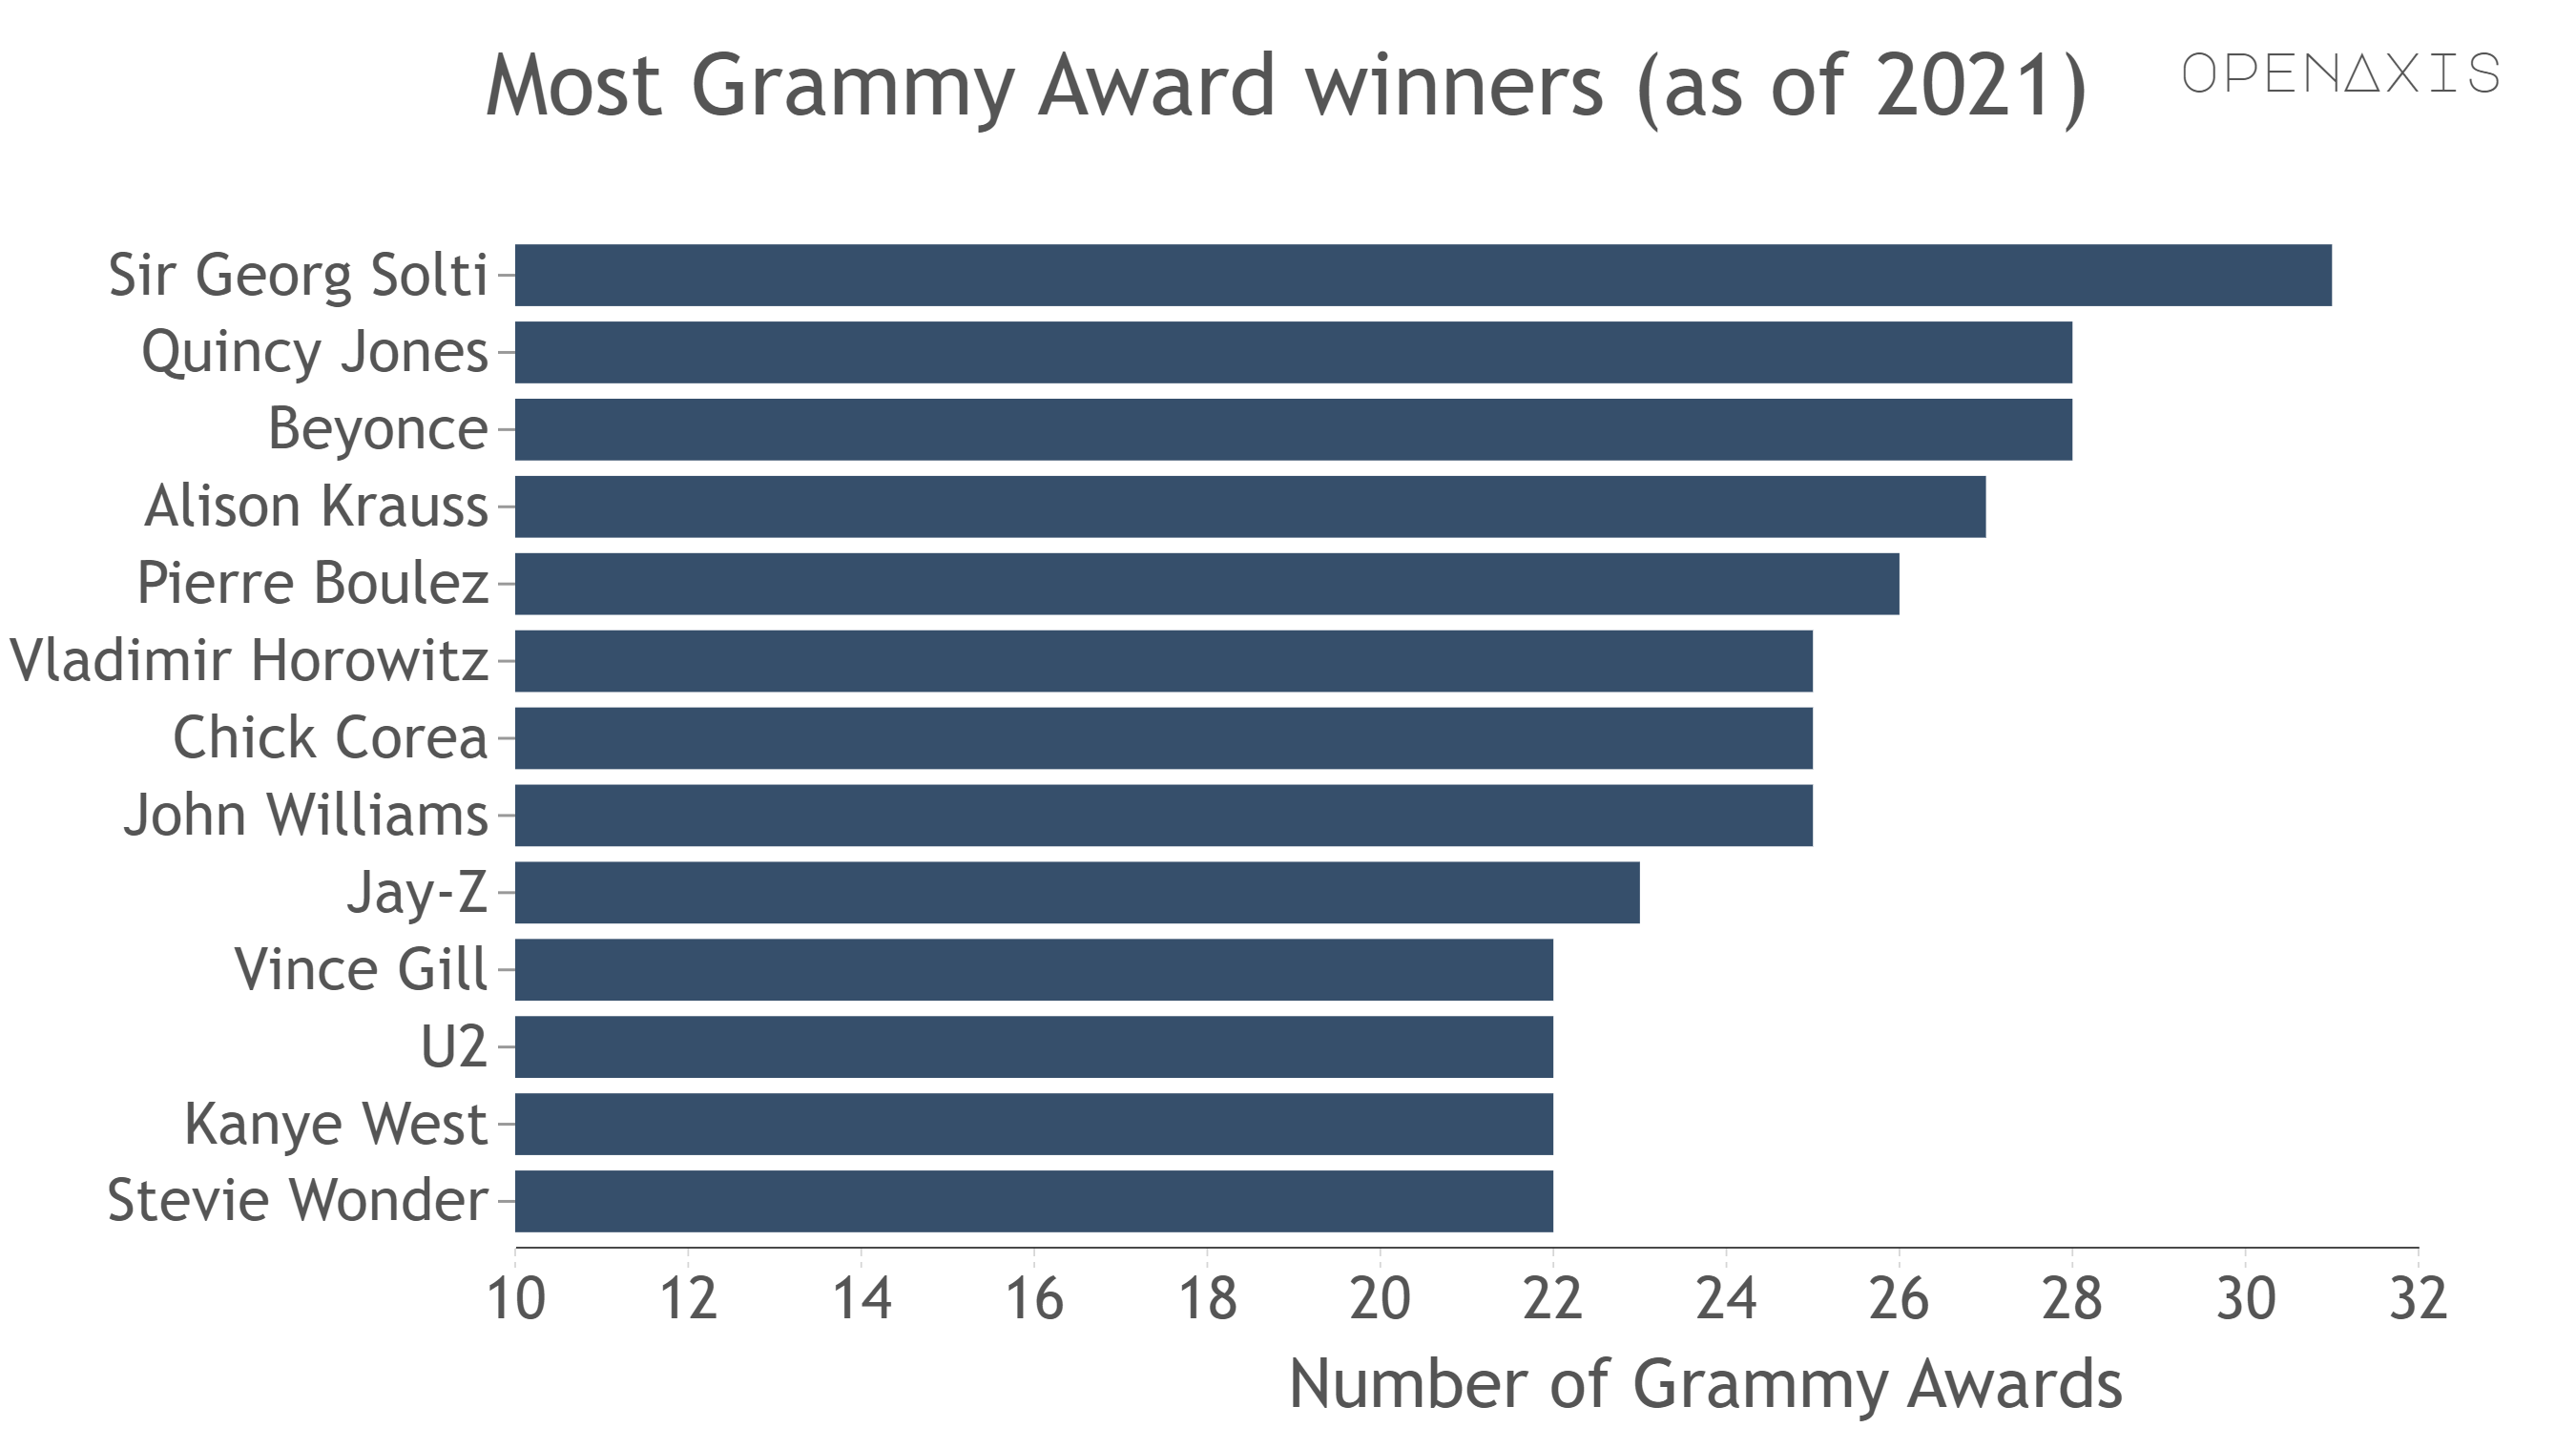 <p>The Grammy Awards are annually awarded by members of the United States National Academy of Recording Arts and Sciences (NARAS) in recognition of excellence in the recording arts and sciences.</p><p><br /></p><p>They are the equivalent of other annual prestigious awards in the American entertainment industry, such as the Academy Awards - OSCARS (for motion pictures), the Emmy Awards (for television) and the Tony Awards (for stage performance).</p><p><br /></p><p>Sir Georg Solti, an orchestral and operatic conductor, is the most Grammy Award-winning individual of all time with a total of 31 Grammy Awards won for recordings of works as diverse as Bach, Bartók, and Wagner.</p><p><br /></p><p>Details <a href="https://www.grammy.com/" target="_blank">here</a></p><p><br /></p><p>﻿<a href="/search?q=%23music" target="_blank">#music</a>﻿</p><p><br /></p><p>Source: <a href="/data/3953" target="_blank">NARAS, Grammy.com</a></p><p><br /></p>